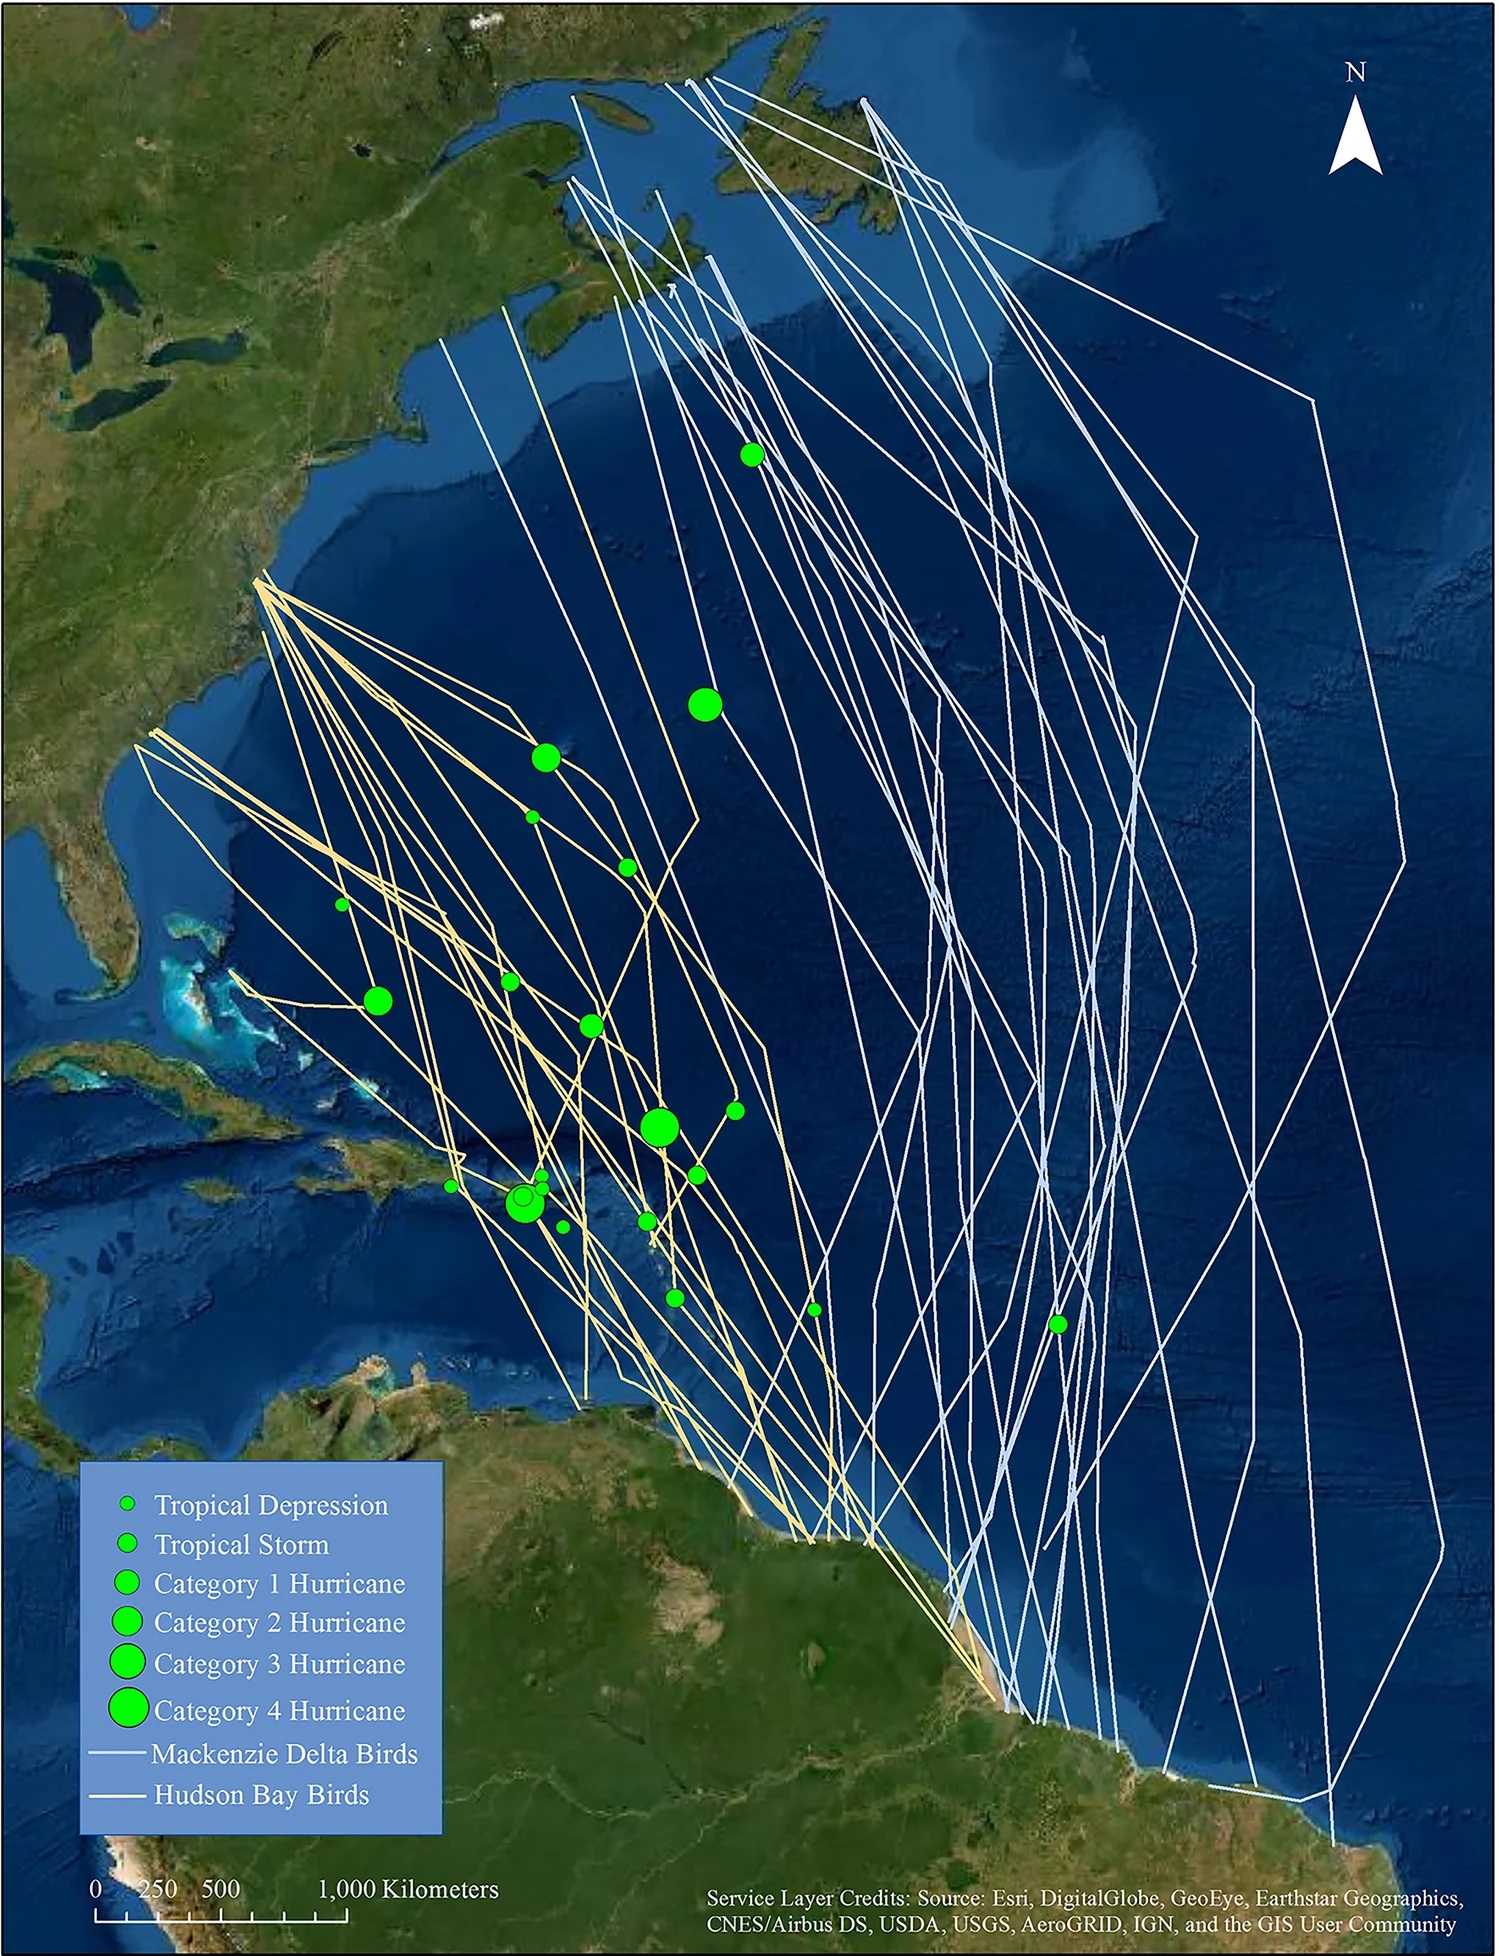 Individual tracks of whimbrels during fall migrations from Mackenzie Delta and Hudson Bay populations